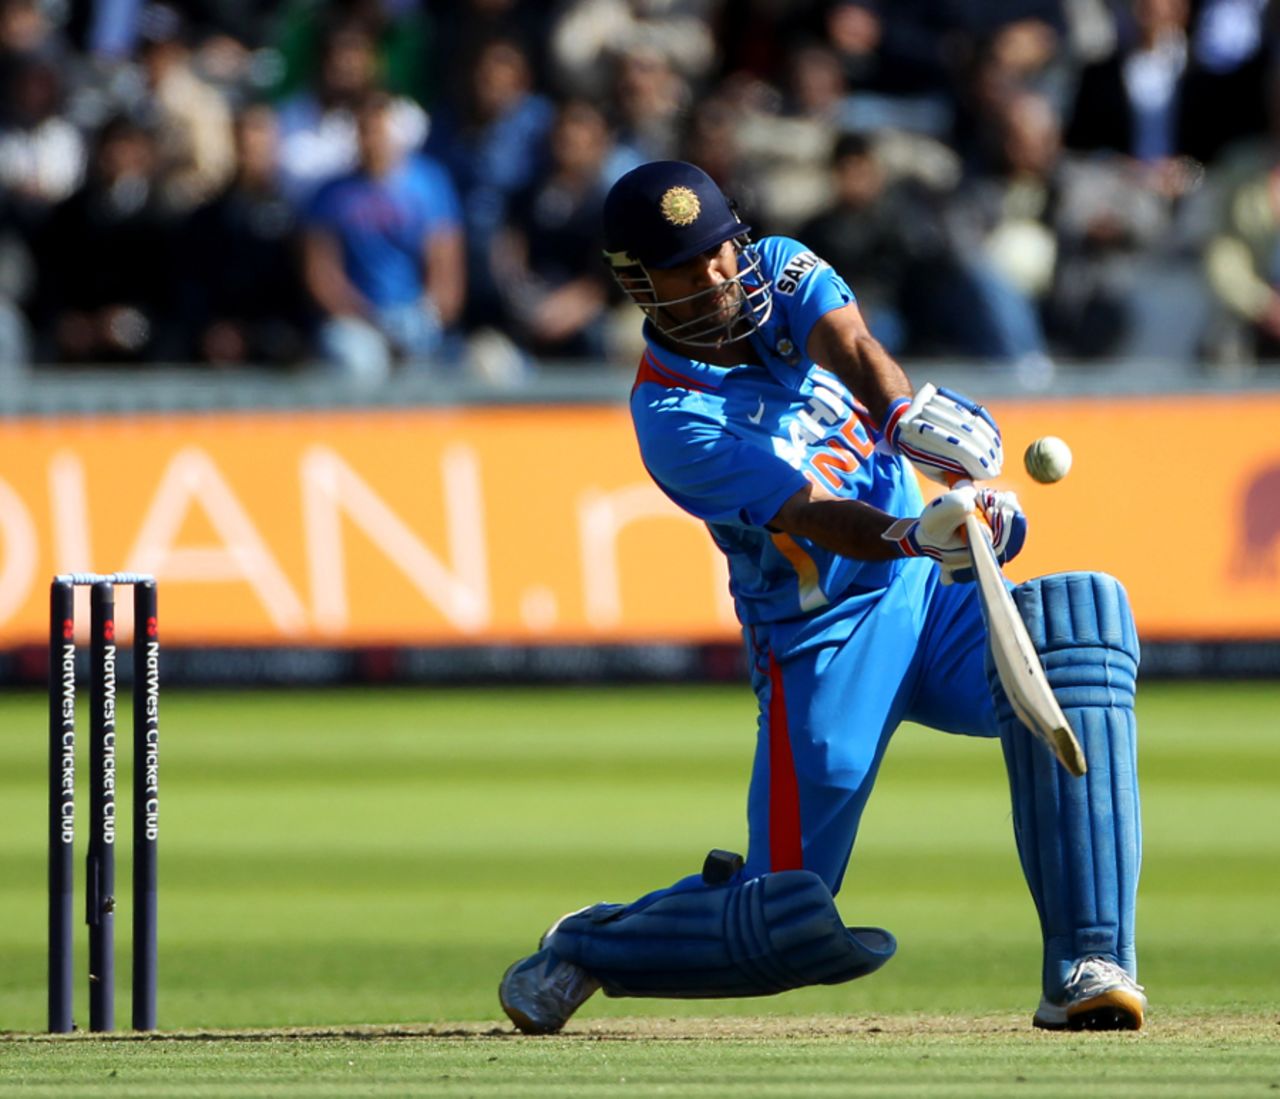 MS Dhoni launches a six at the end of India's innings, England v India, 4th ODI, Lord's, September 11, 2011